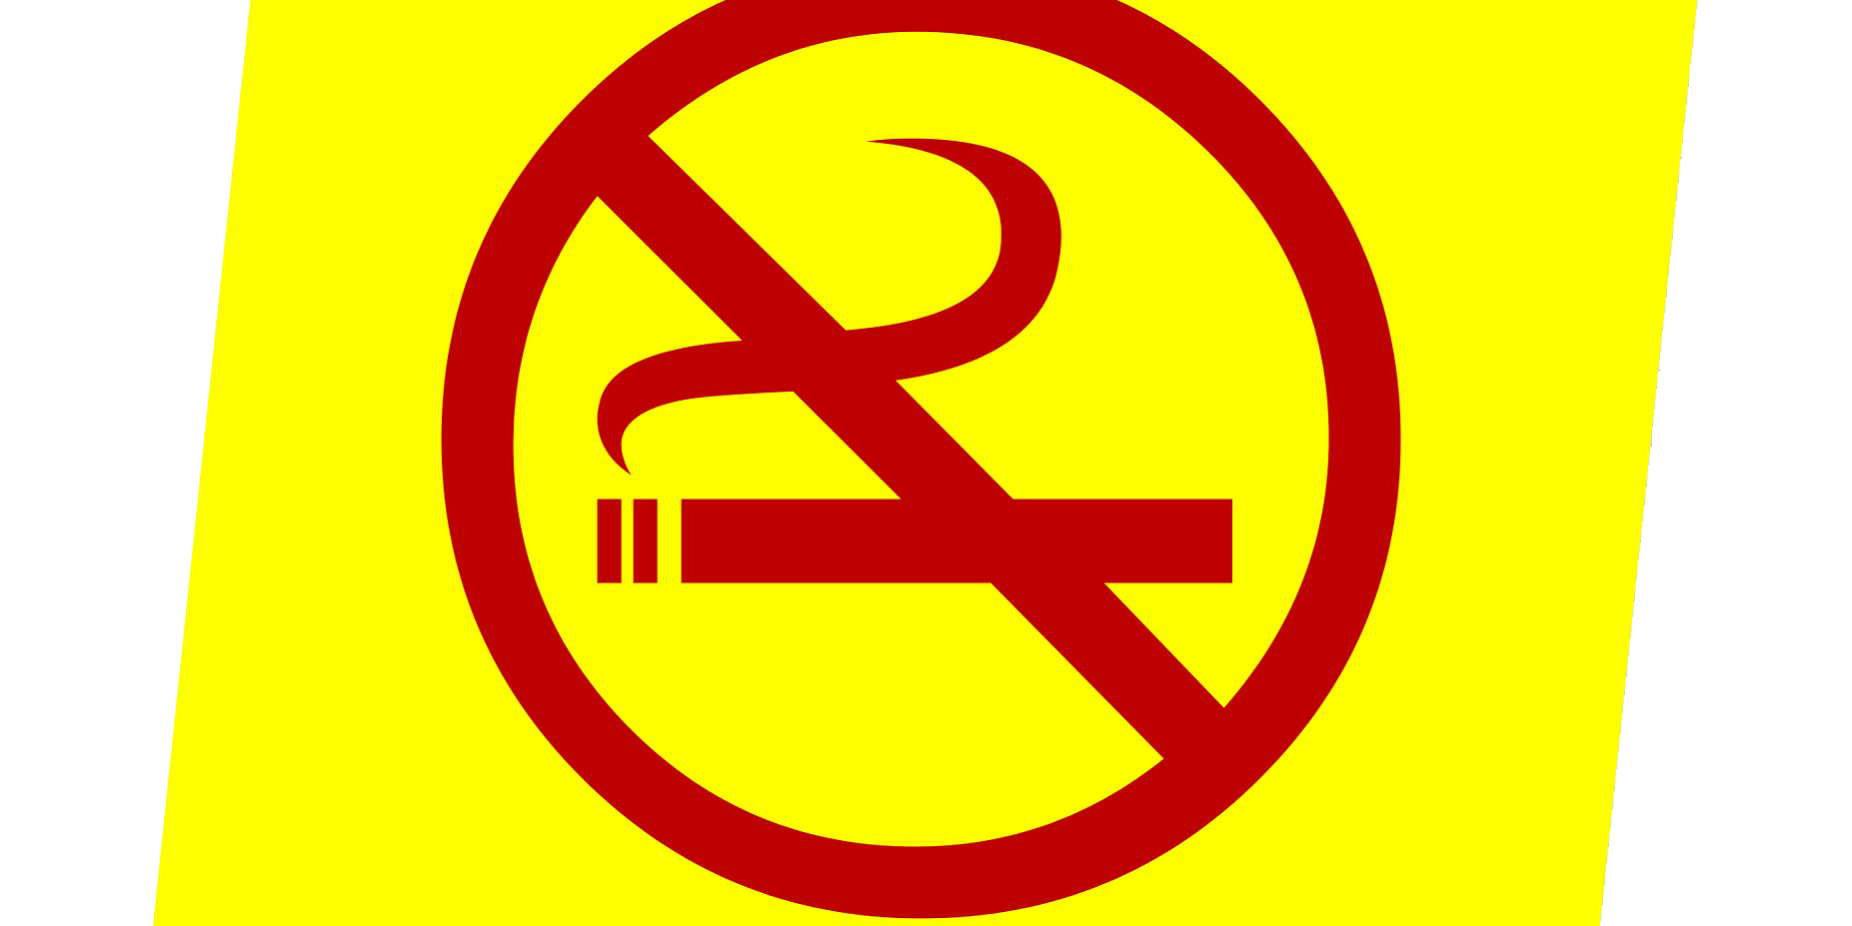 Download PNG image - World No Tobacco Day Background PNG 